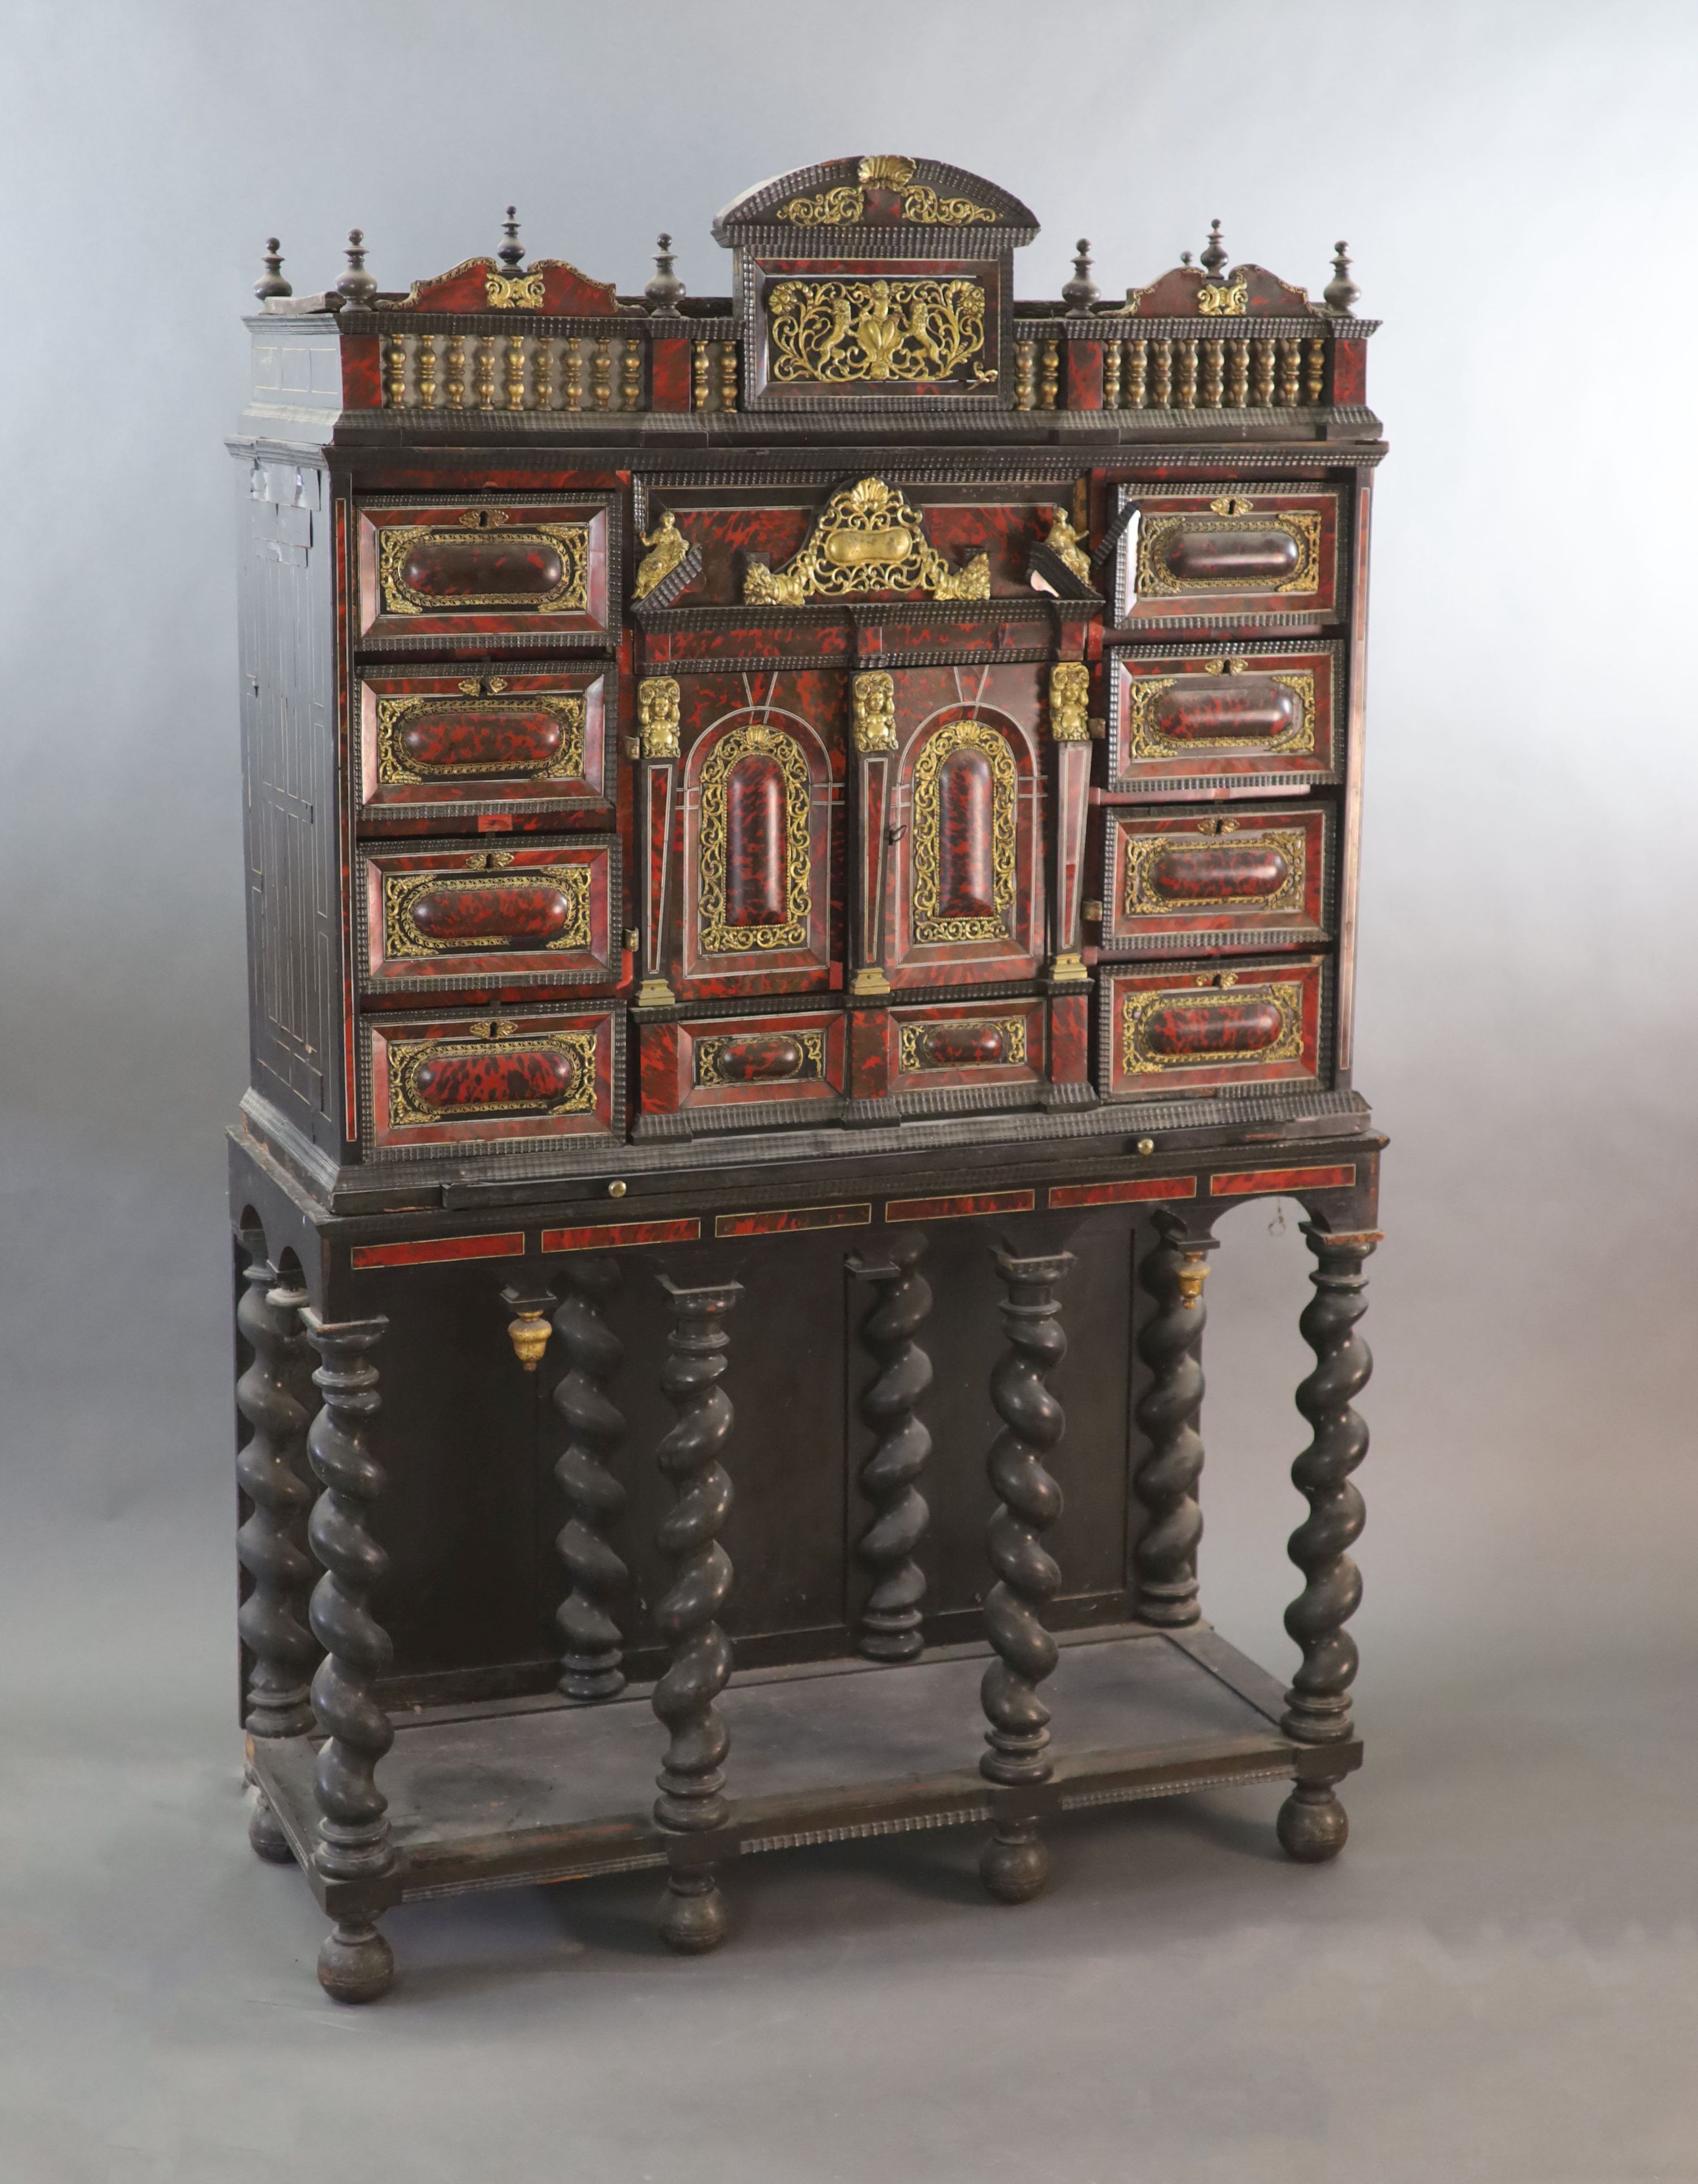 A late 17th century Portuguese ormolu mounted ebony and red tortoiseshell cabinet on stand,of